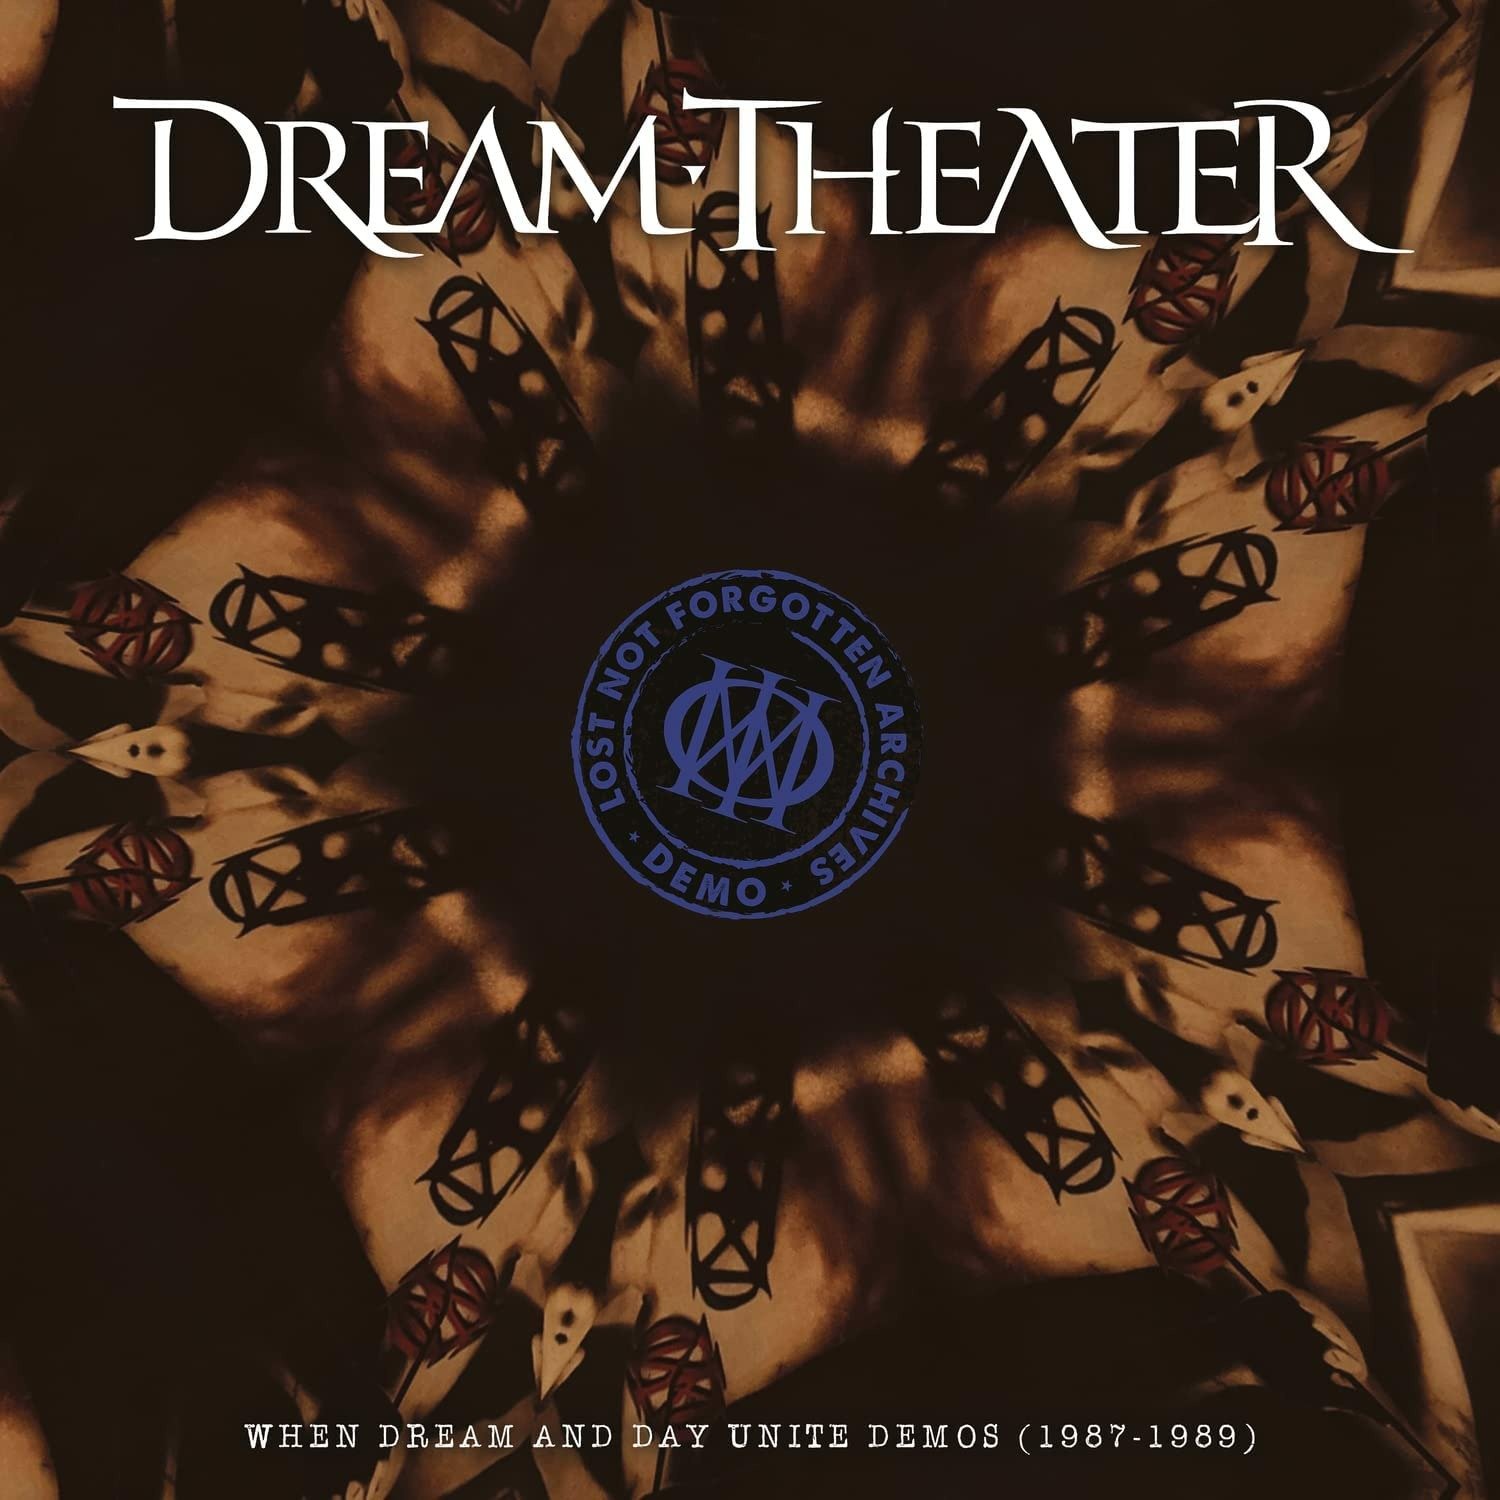 CD Shop - DREAM THEATER LOST NOT FORGOTTEN ARCHIVES: WHEN DREAM AND DAY UNITE DEMOS (1987-1989) -HQ- 3LP+2CD